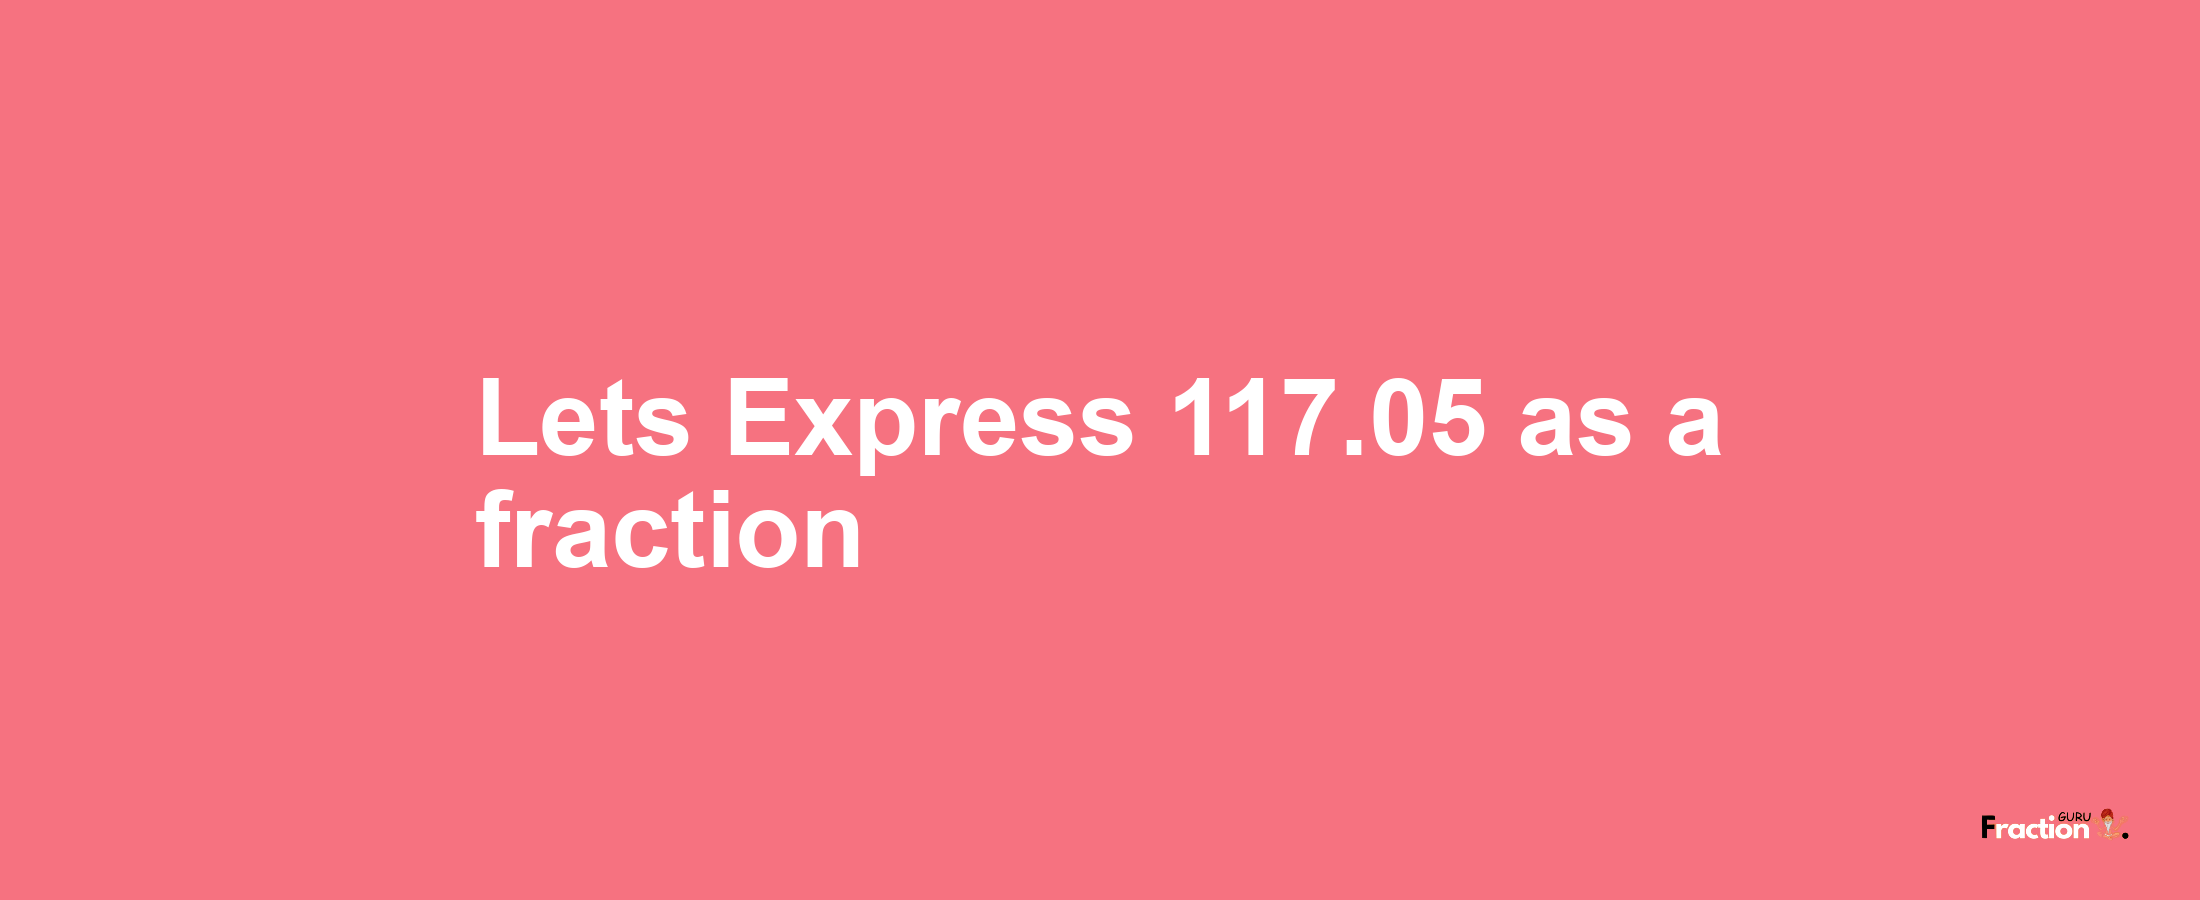 Lets Express 117.05 as afraction